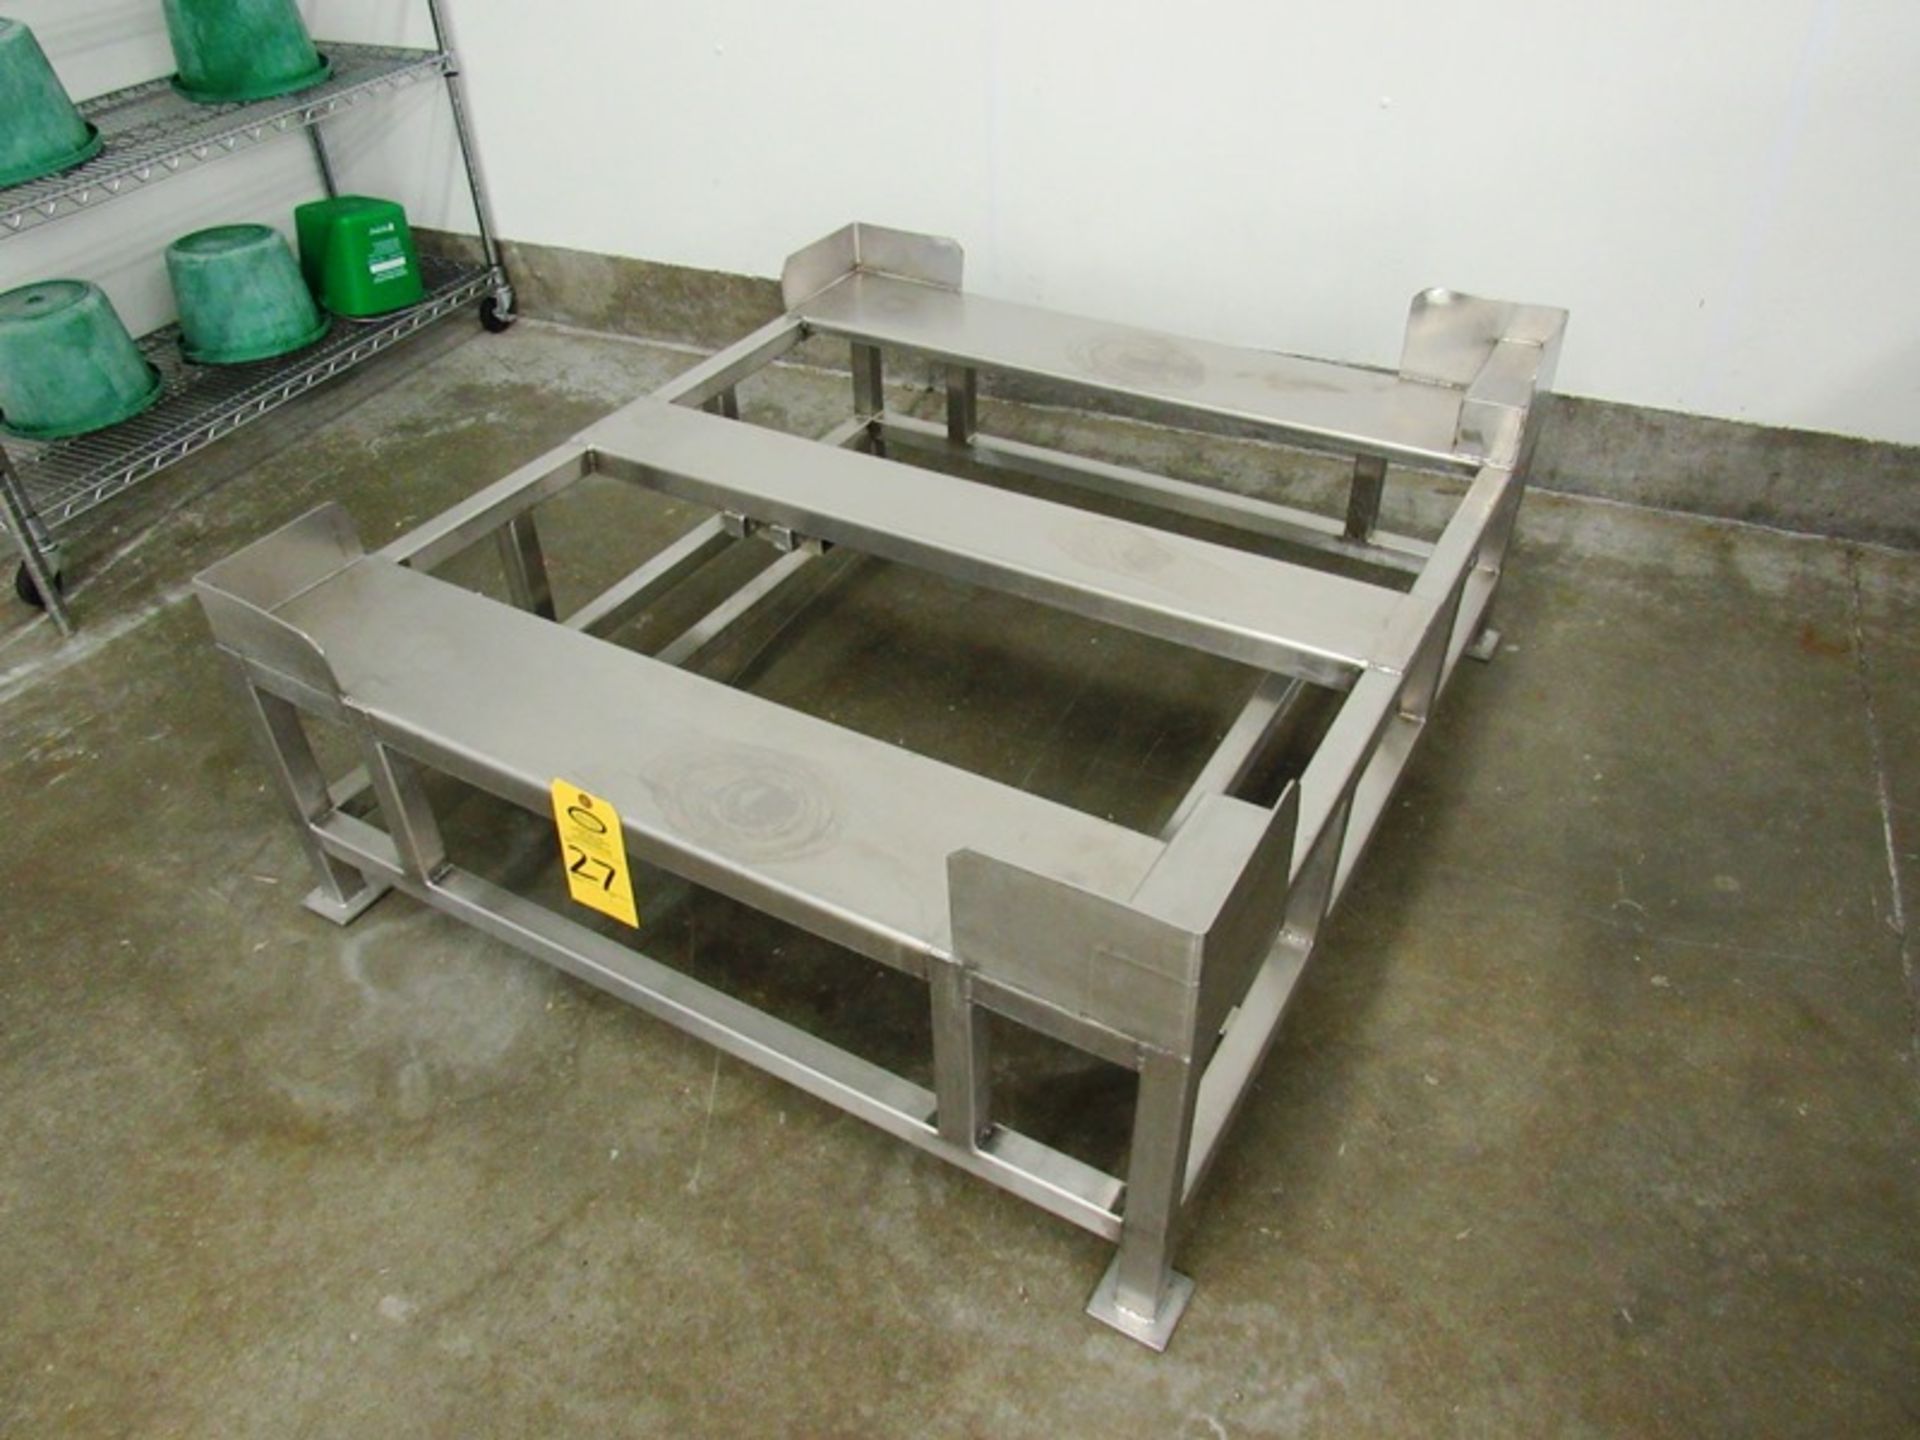 Stainless Steel Stand, 40" W X 48" L X 20" T (Removal Begins July 5th) Loading Fee $35 Rigger: